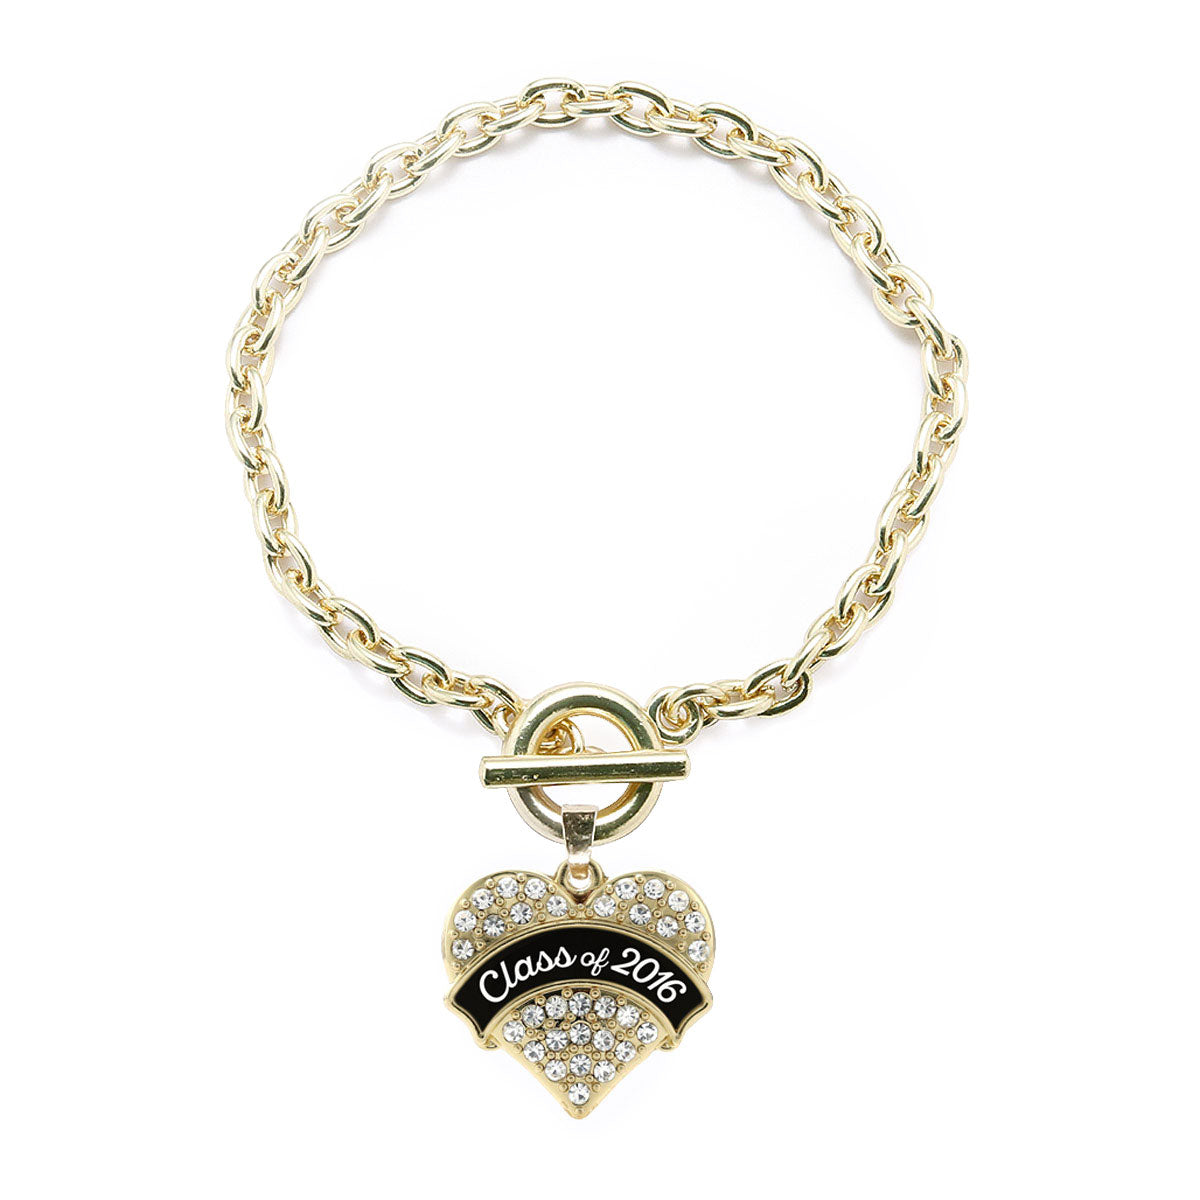 Gold Black and White Class of 2016 Pave Heart Charm Toggle Bracelet